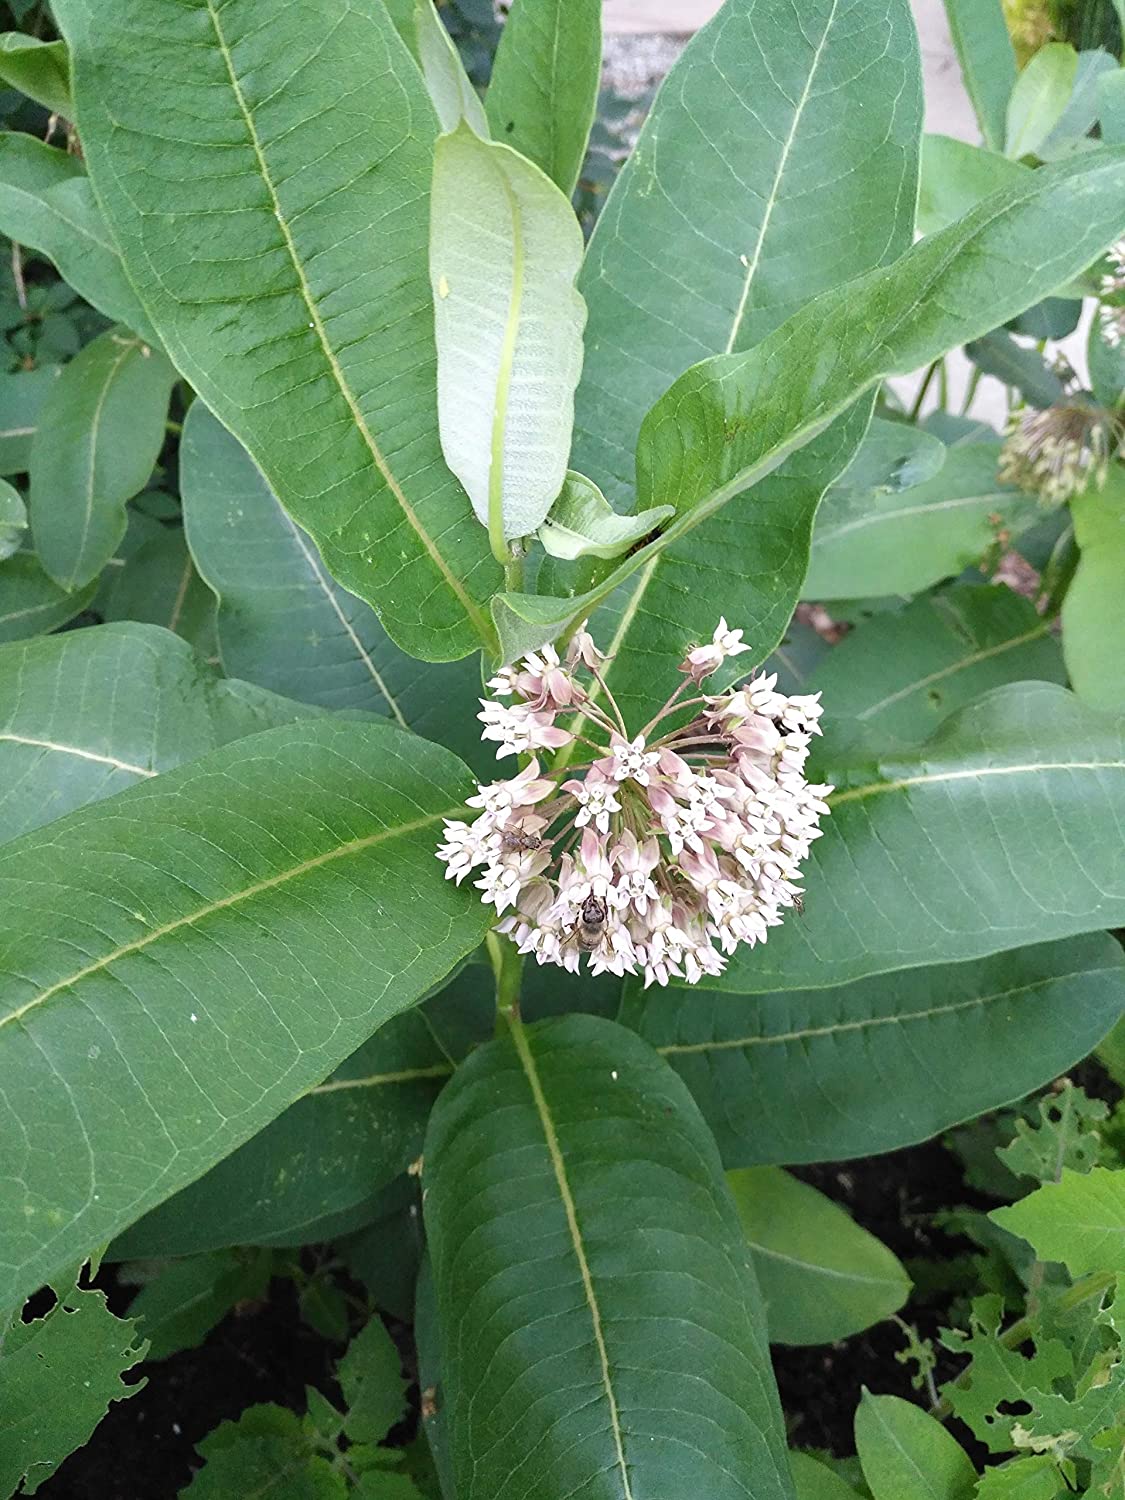 Hundredfold Common Milkweed Native Wild Flower 10 Grams of Seeds - Asclepias syriaca Milk Weed, Food Source for Monarch Caterpillar and Butterfly